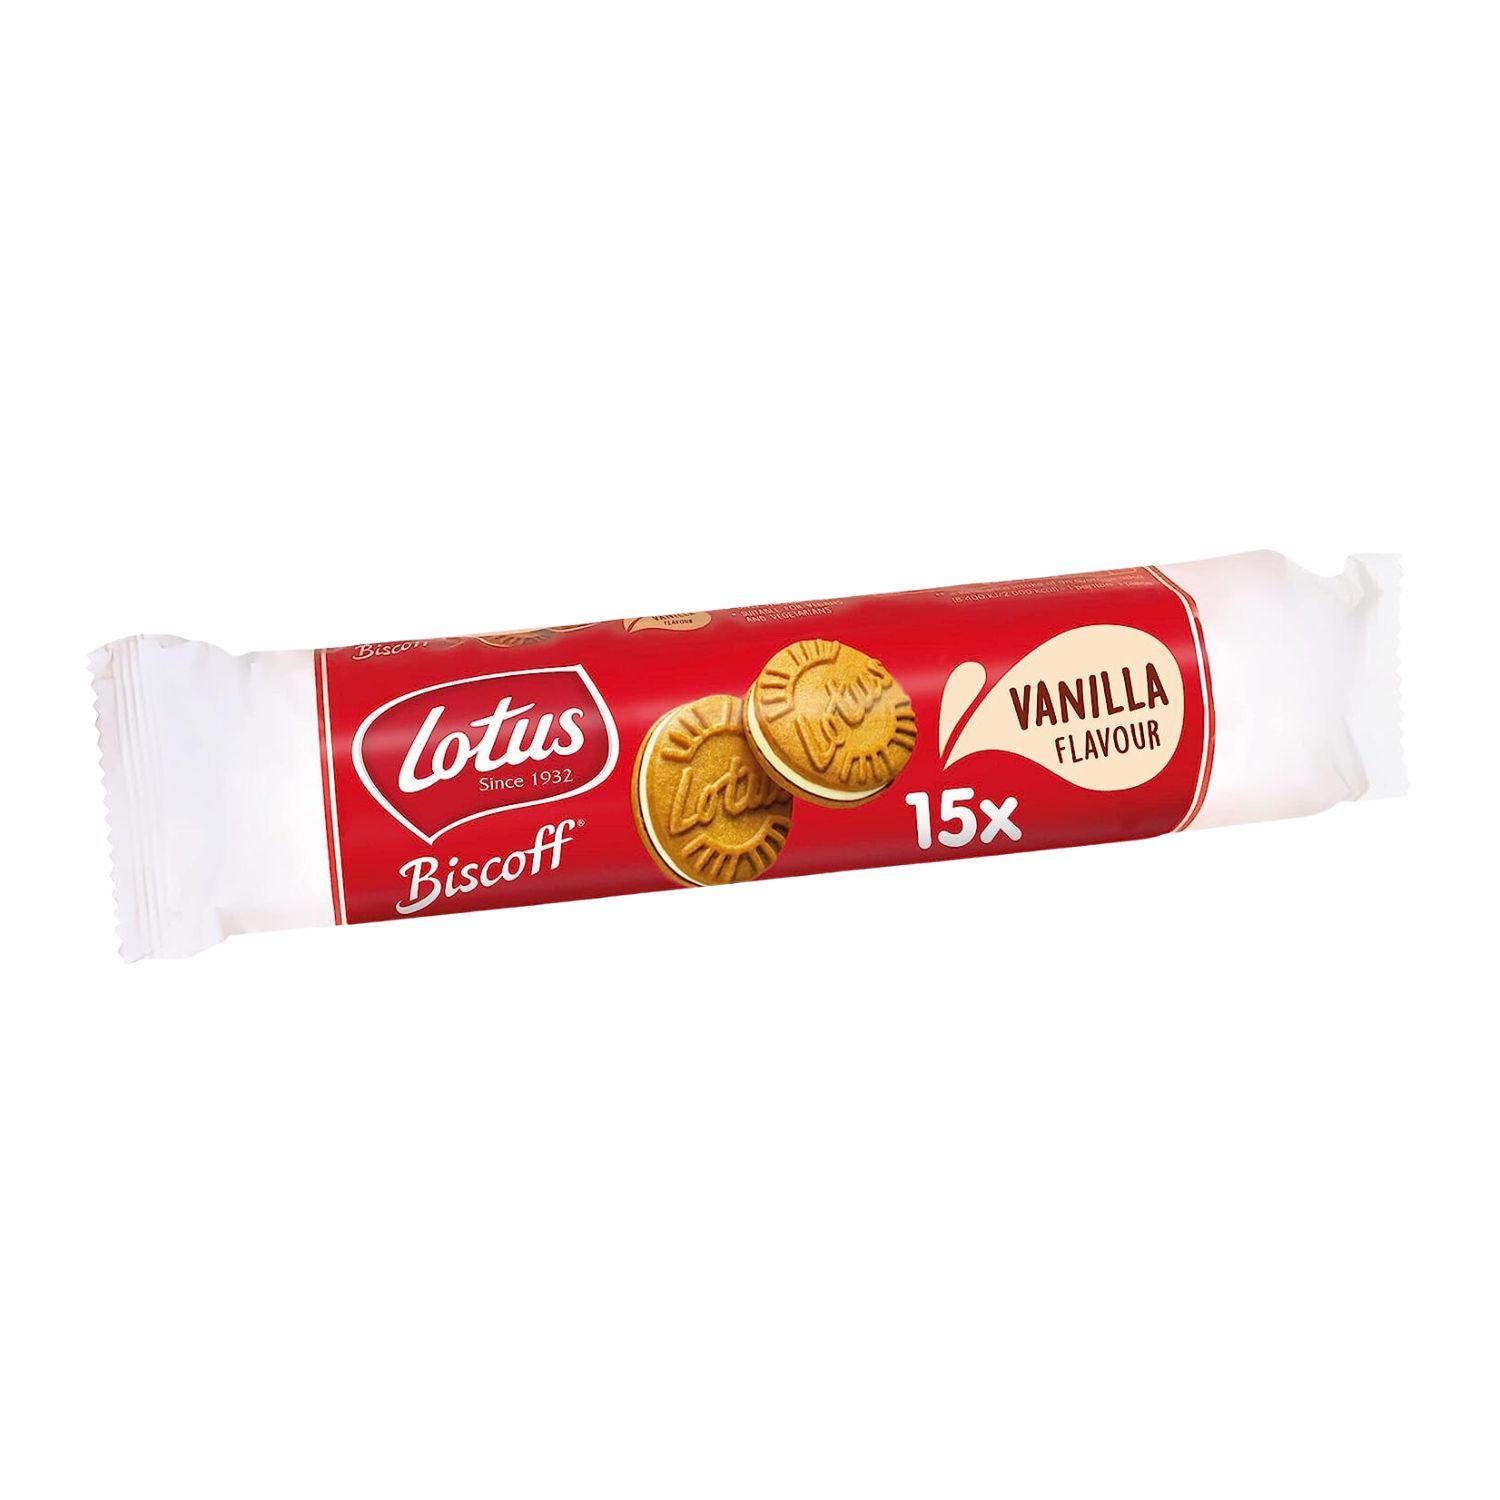 Lotus Biscoff Speculoos chocolate 150g — The Pantry SA